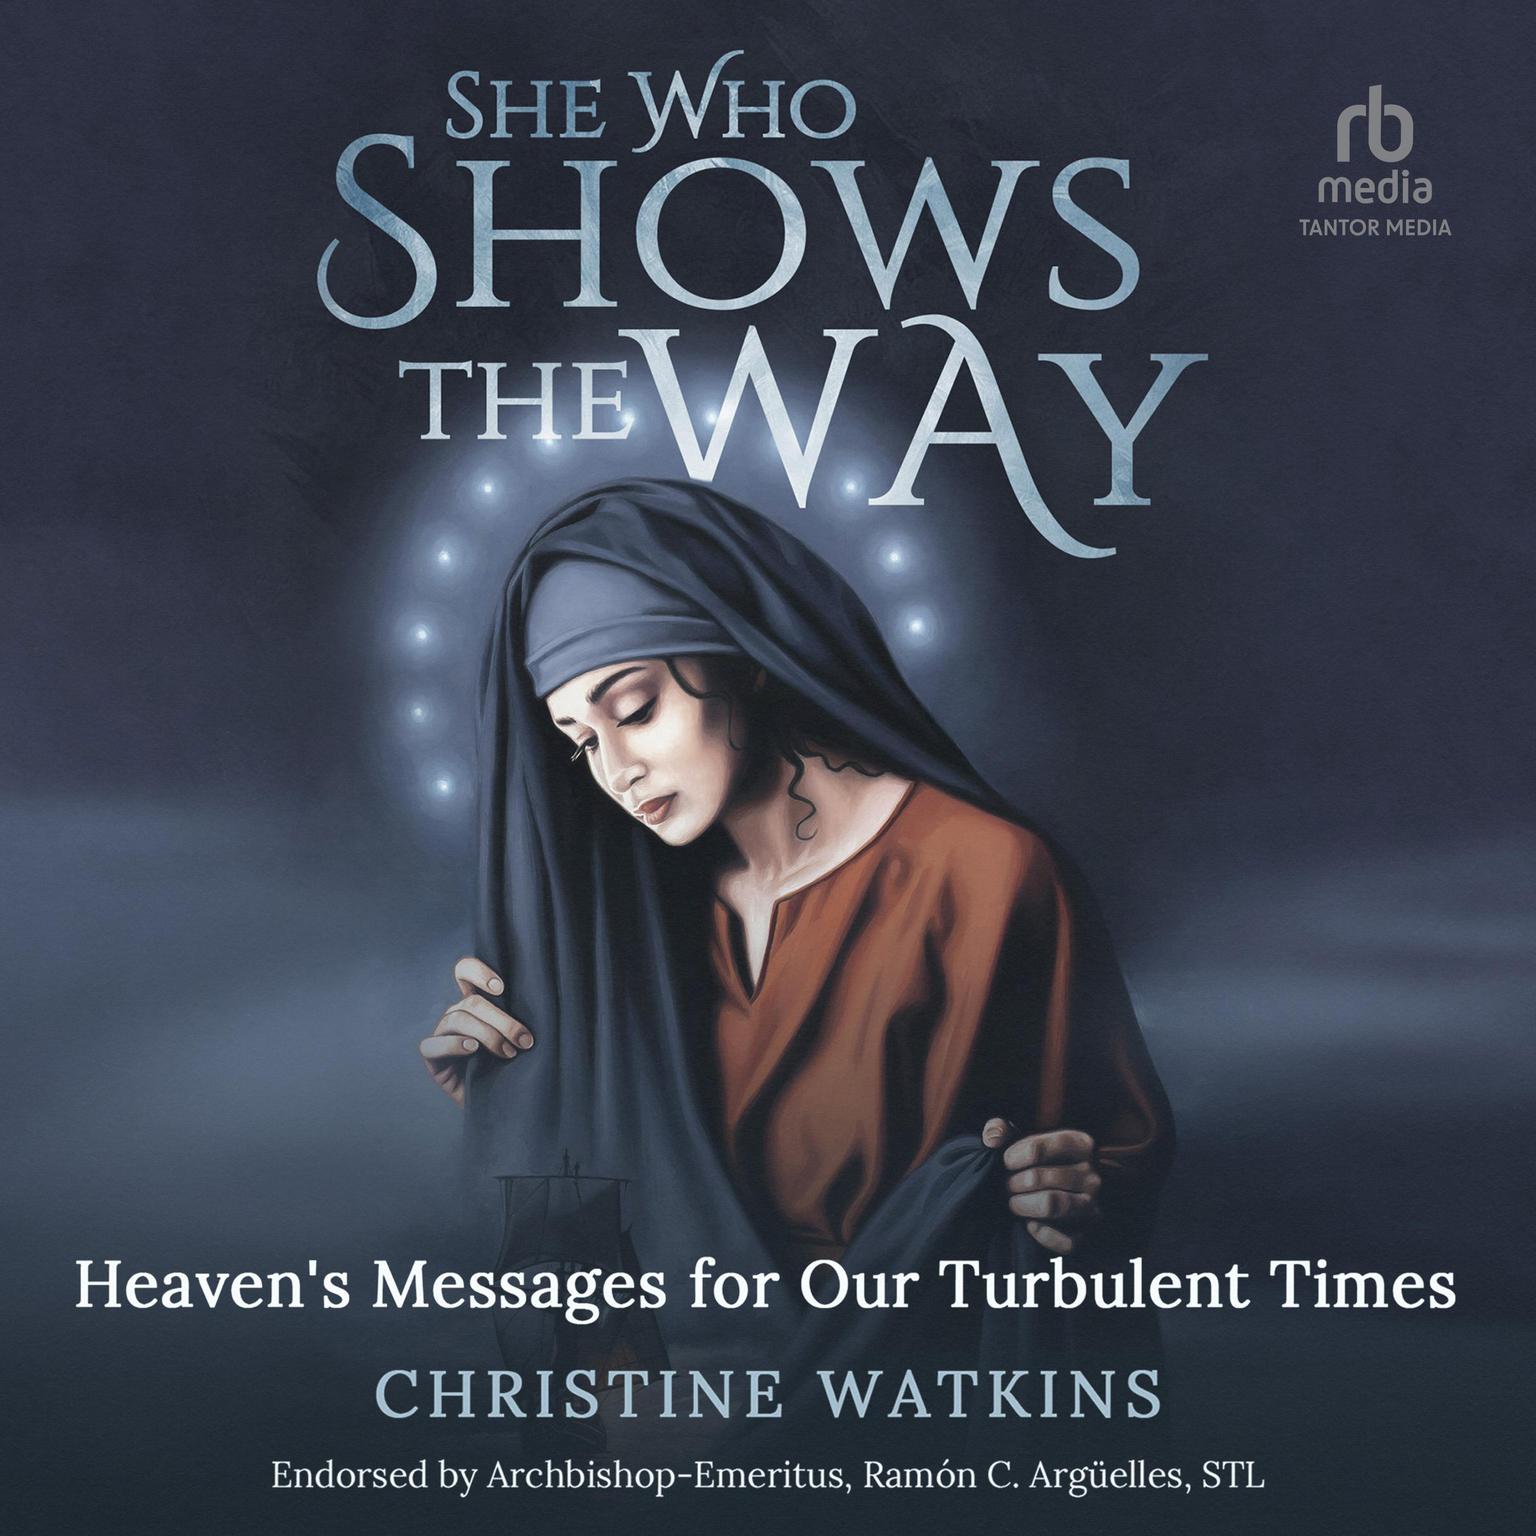 She Who Shows the Way: Heavens Messages for Our Turbulent Times Audiobook, by Christine Watkins